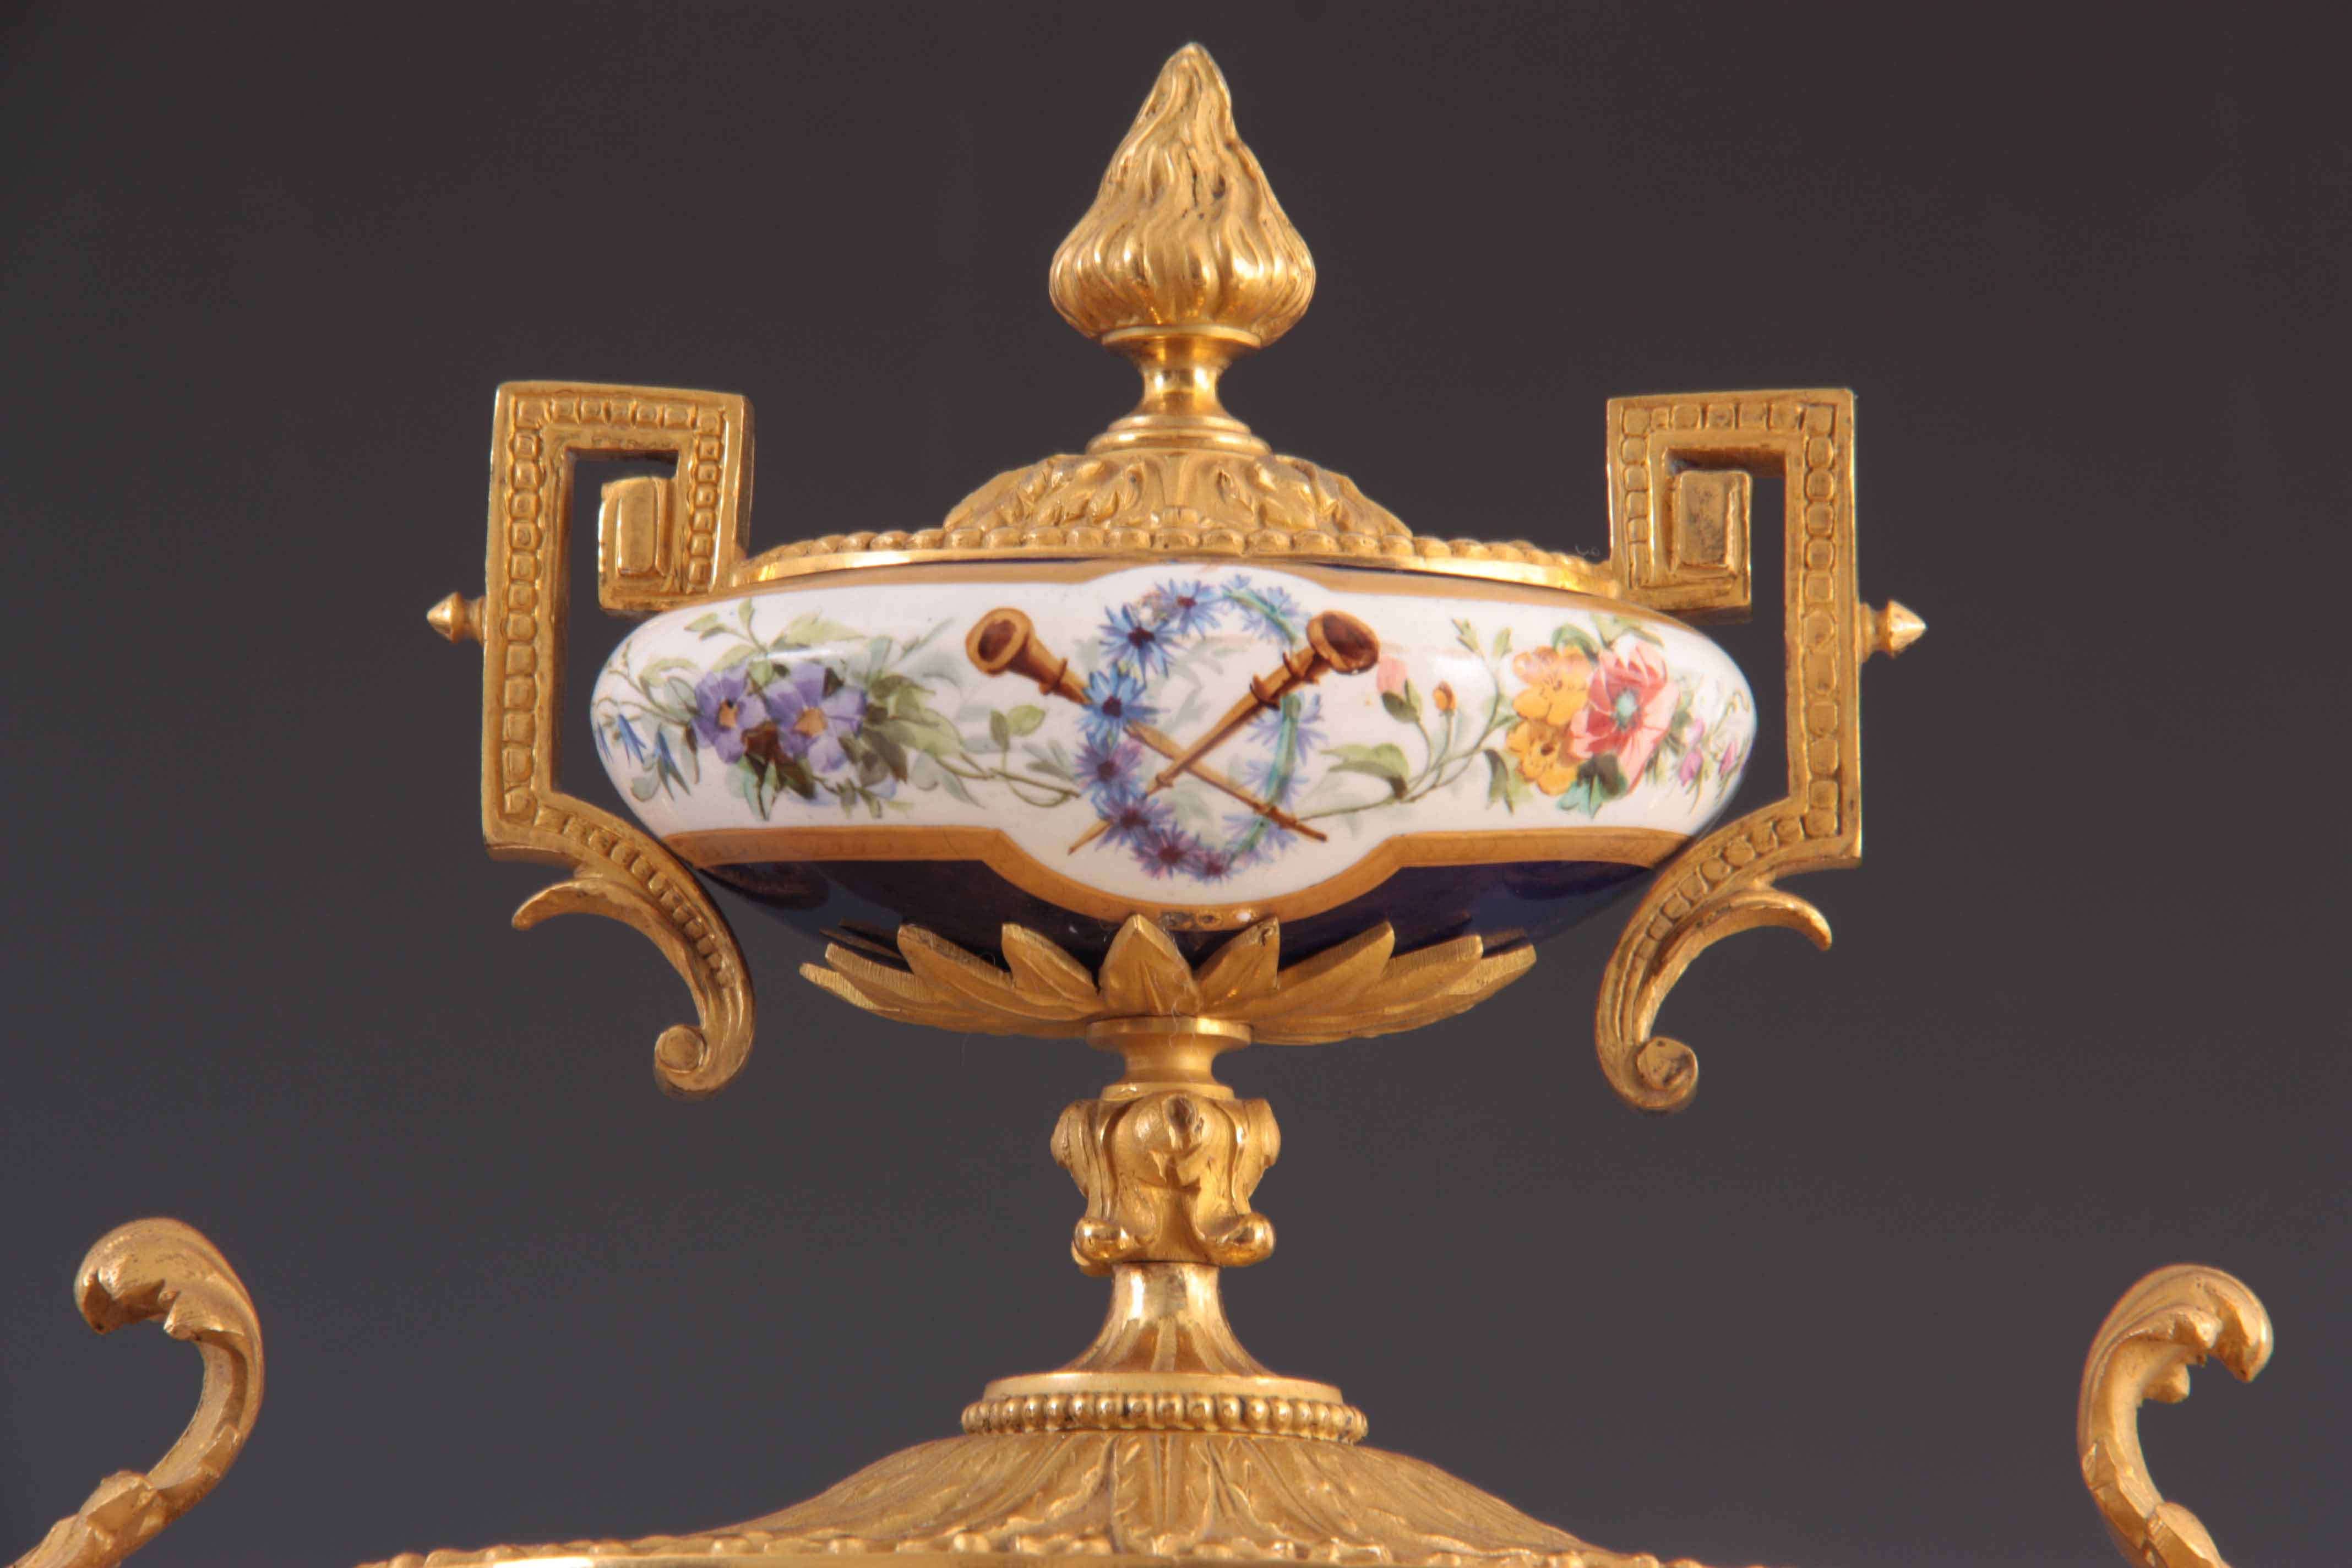 A LATE 19TH CENTURY FRENCH ORMOLU AND PORCELAIN PANEL MANTEL CLOCK the gilt brass case with chased - Image 2 of 8